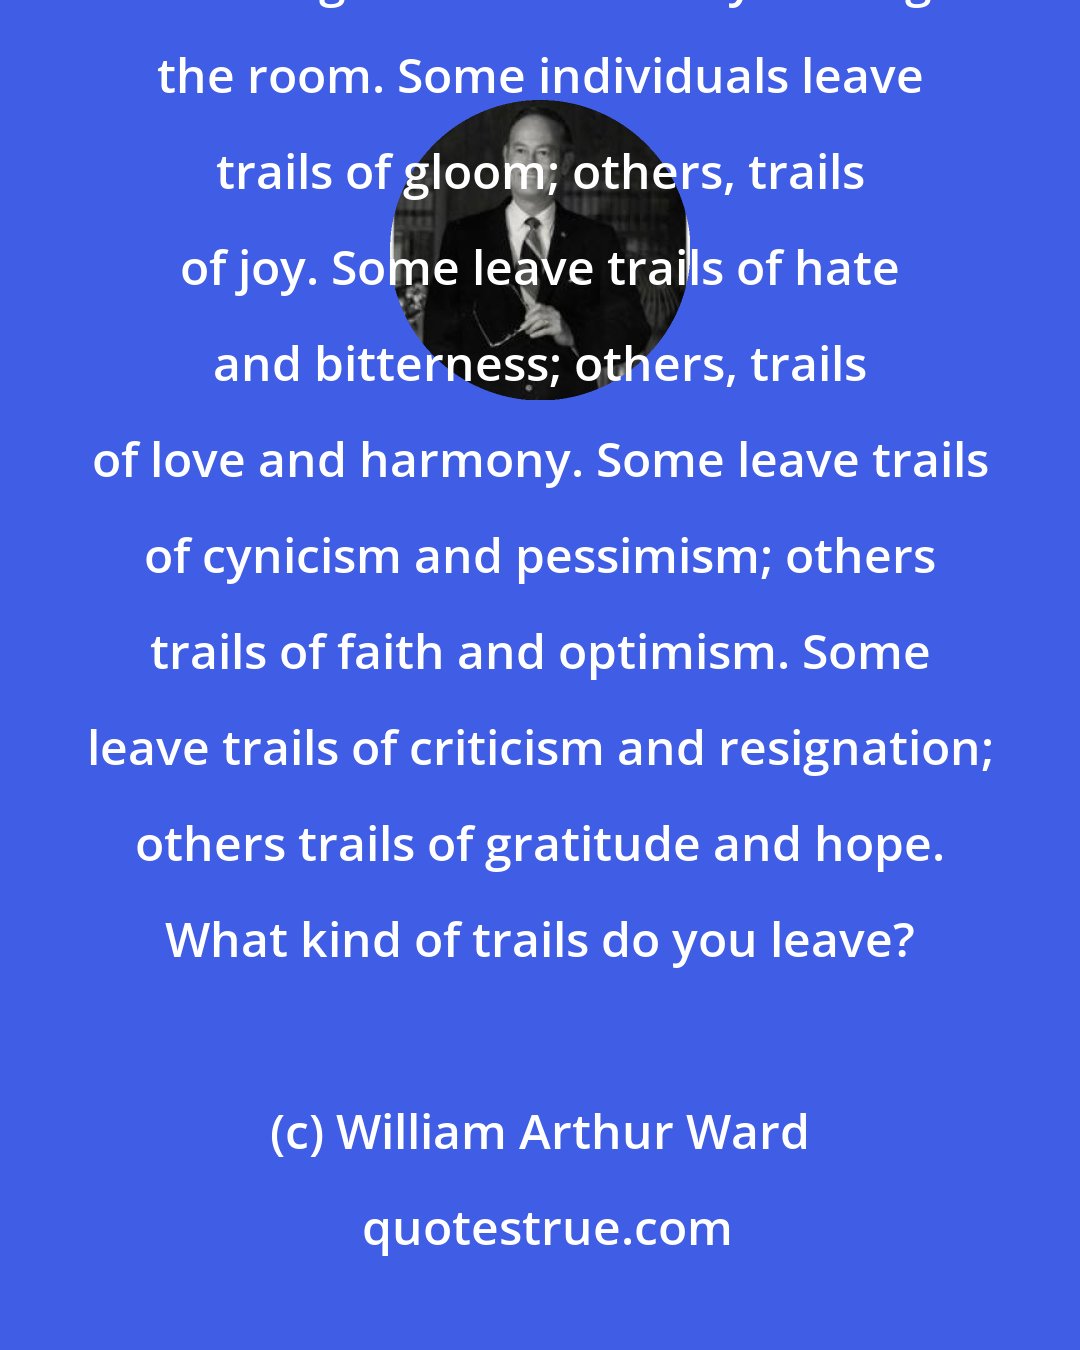 William Arthur Ward: Every person has the power to make others happy. Some do it simply by entering a room others by leaving the room. Some individuals leave trails of gloom; others, trails of joy. Some leave trails of hate and bitterness; others, trails of love and harmony. Some leave trails of cynicism and pessimism; others trails of faith and optimism. Some leave trails of criticism and resignation; others trails of gratitude and hope. What kind of trails do you leave?